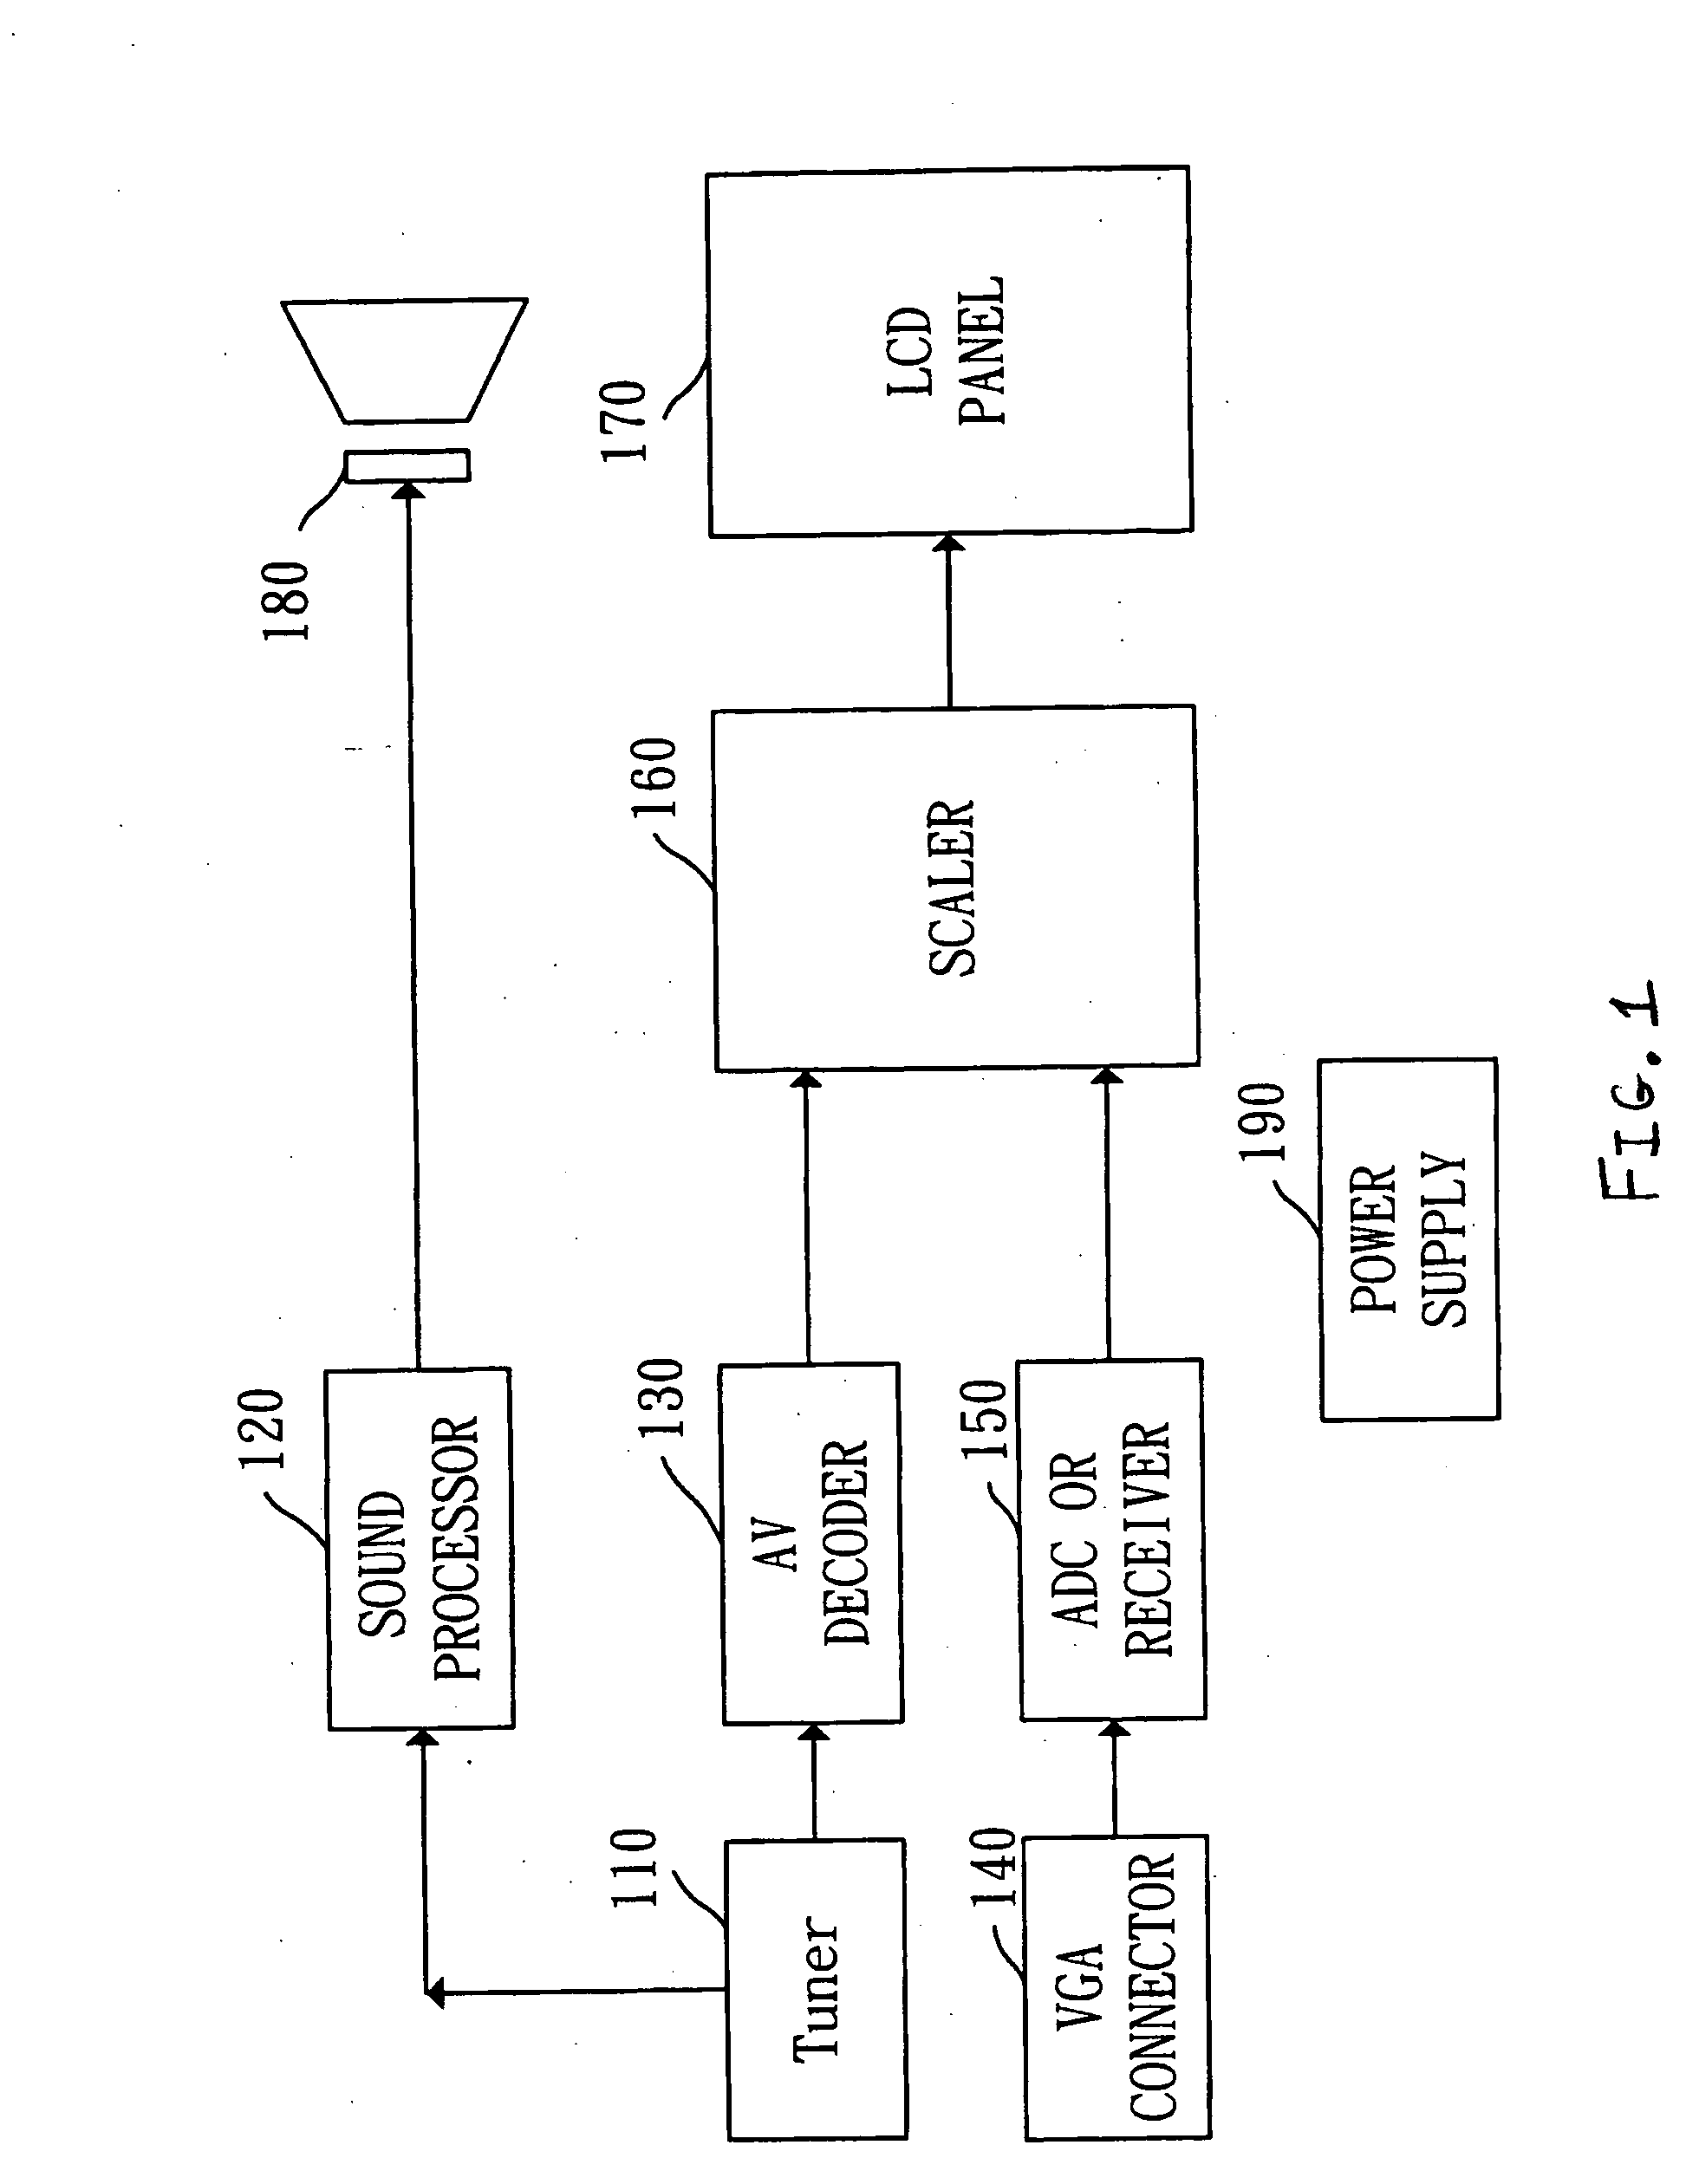 Liquid crystal display with changeable modules